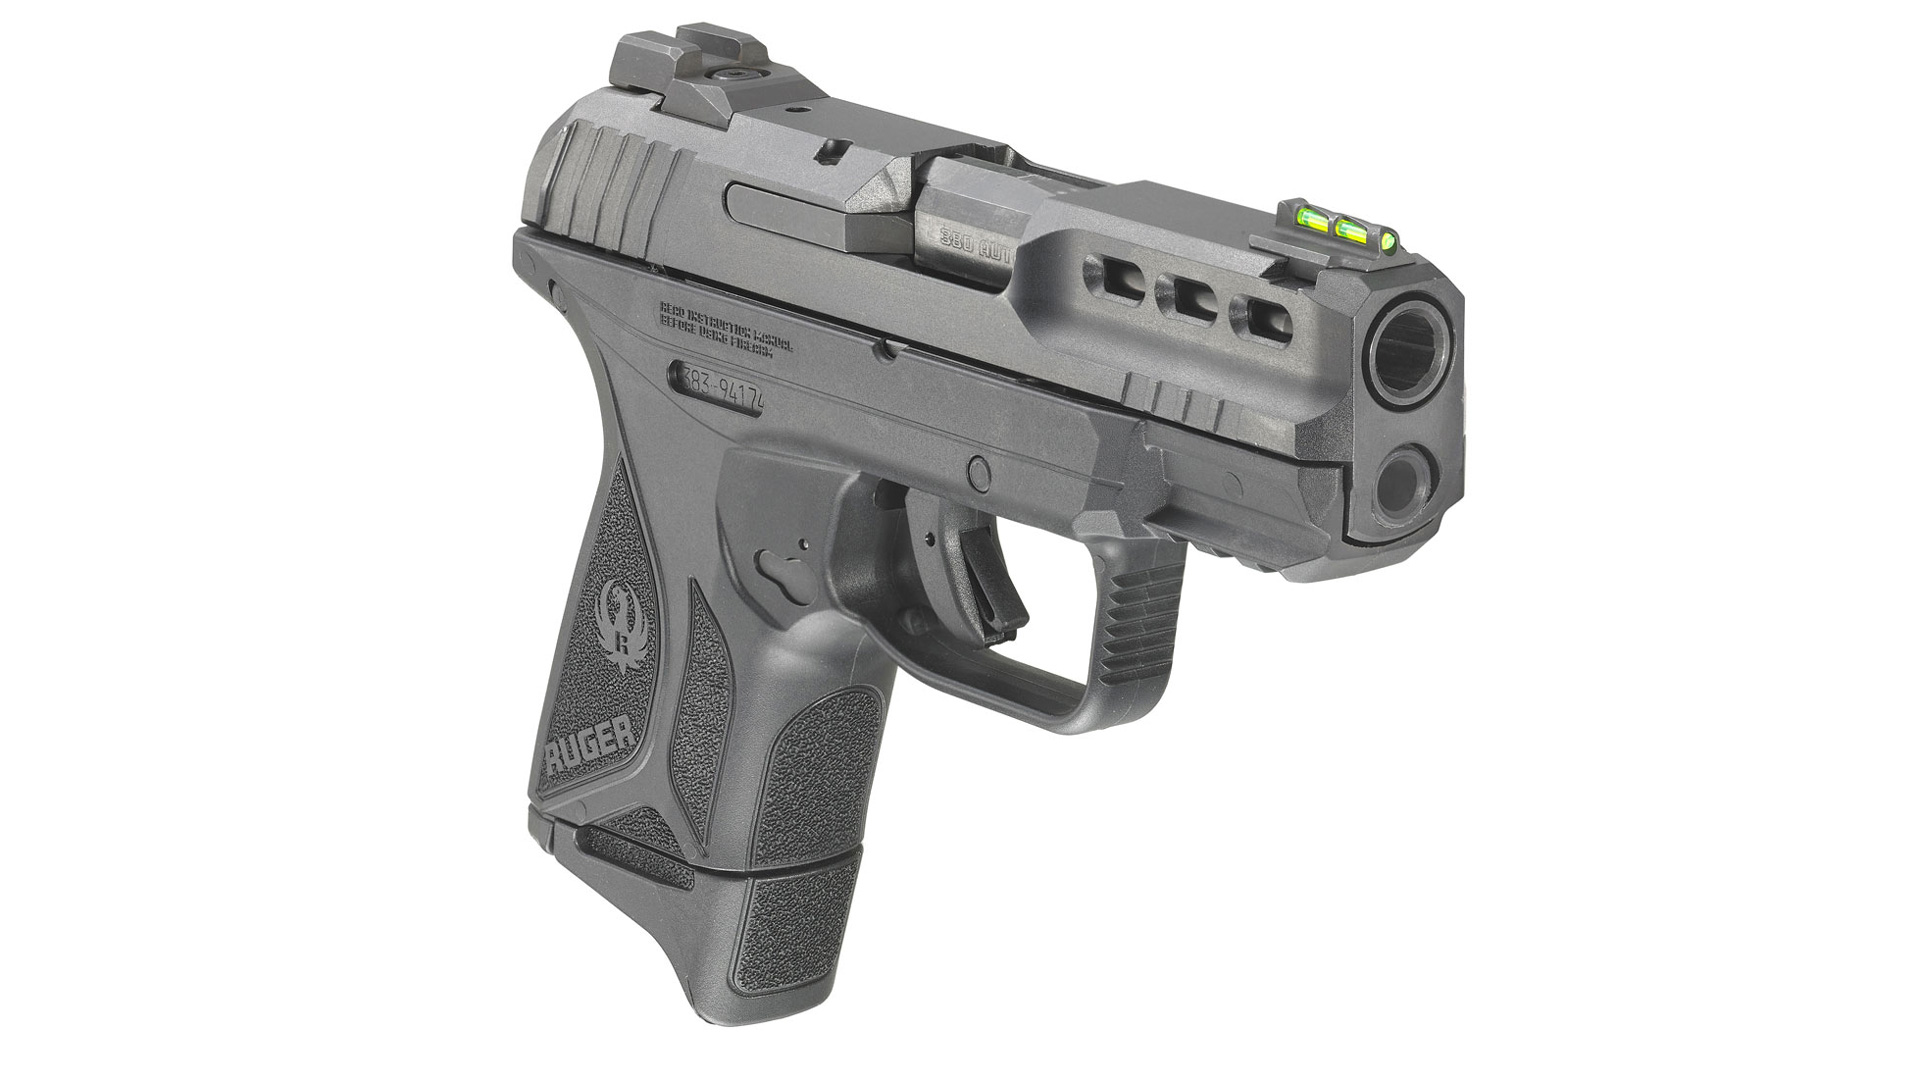 Ruger Security-380 Compact Pistol Review - USA Carry